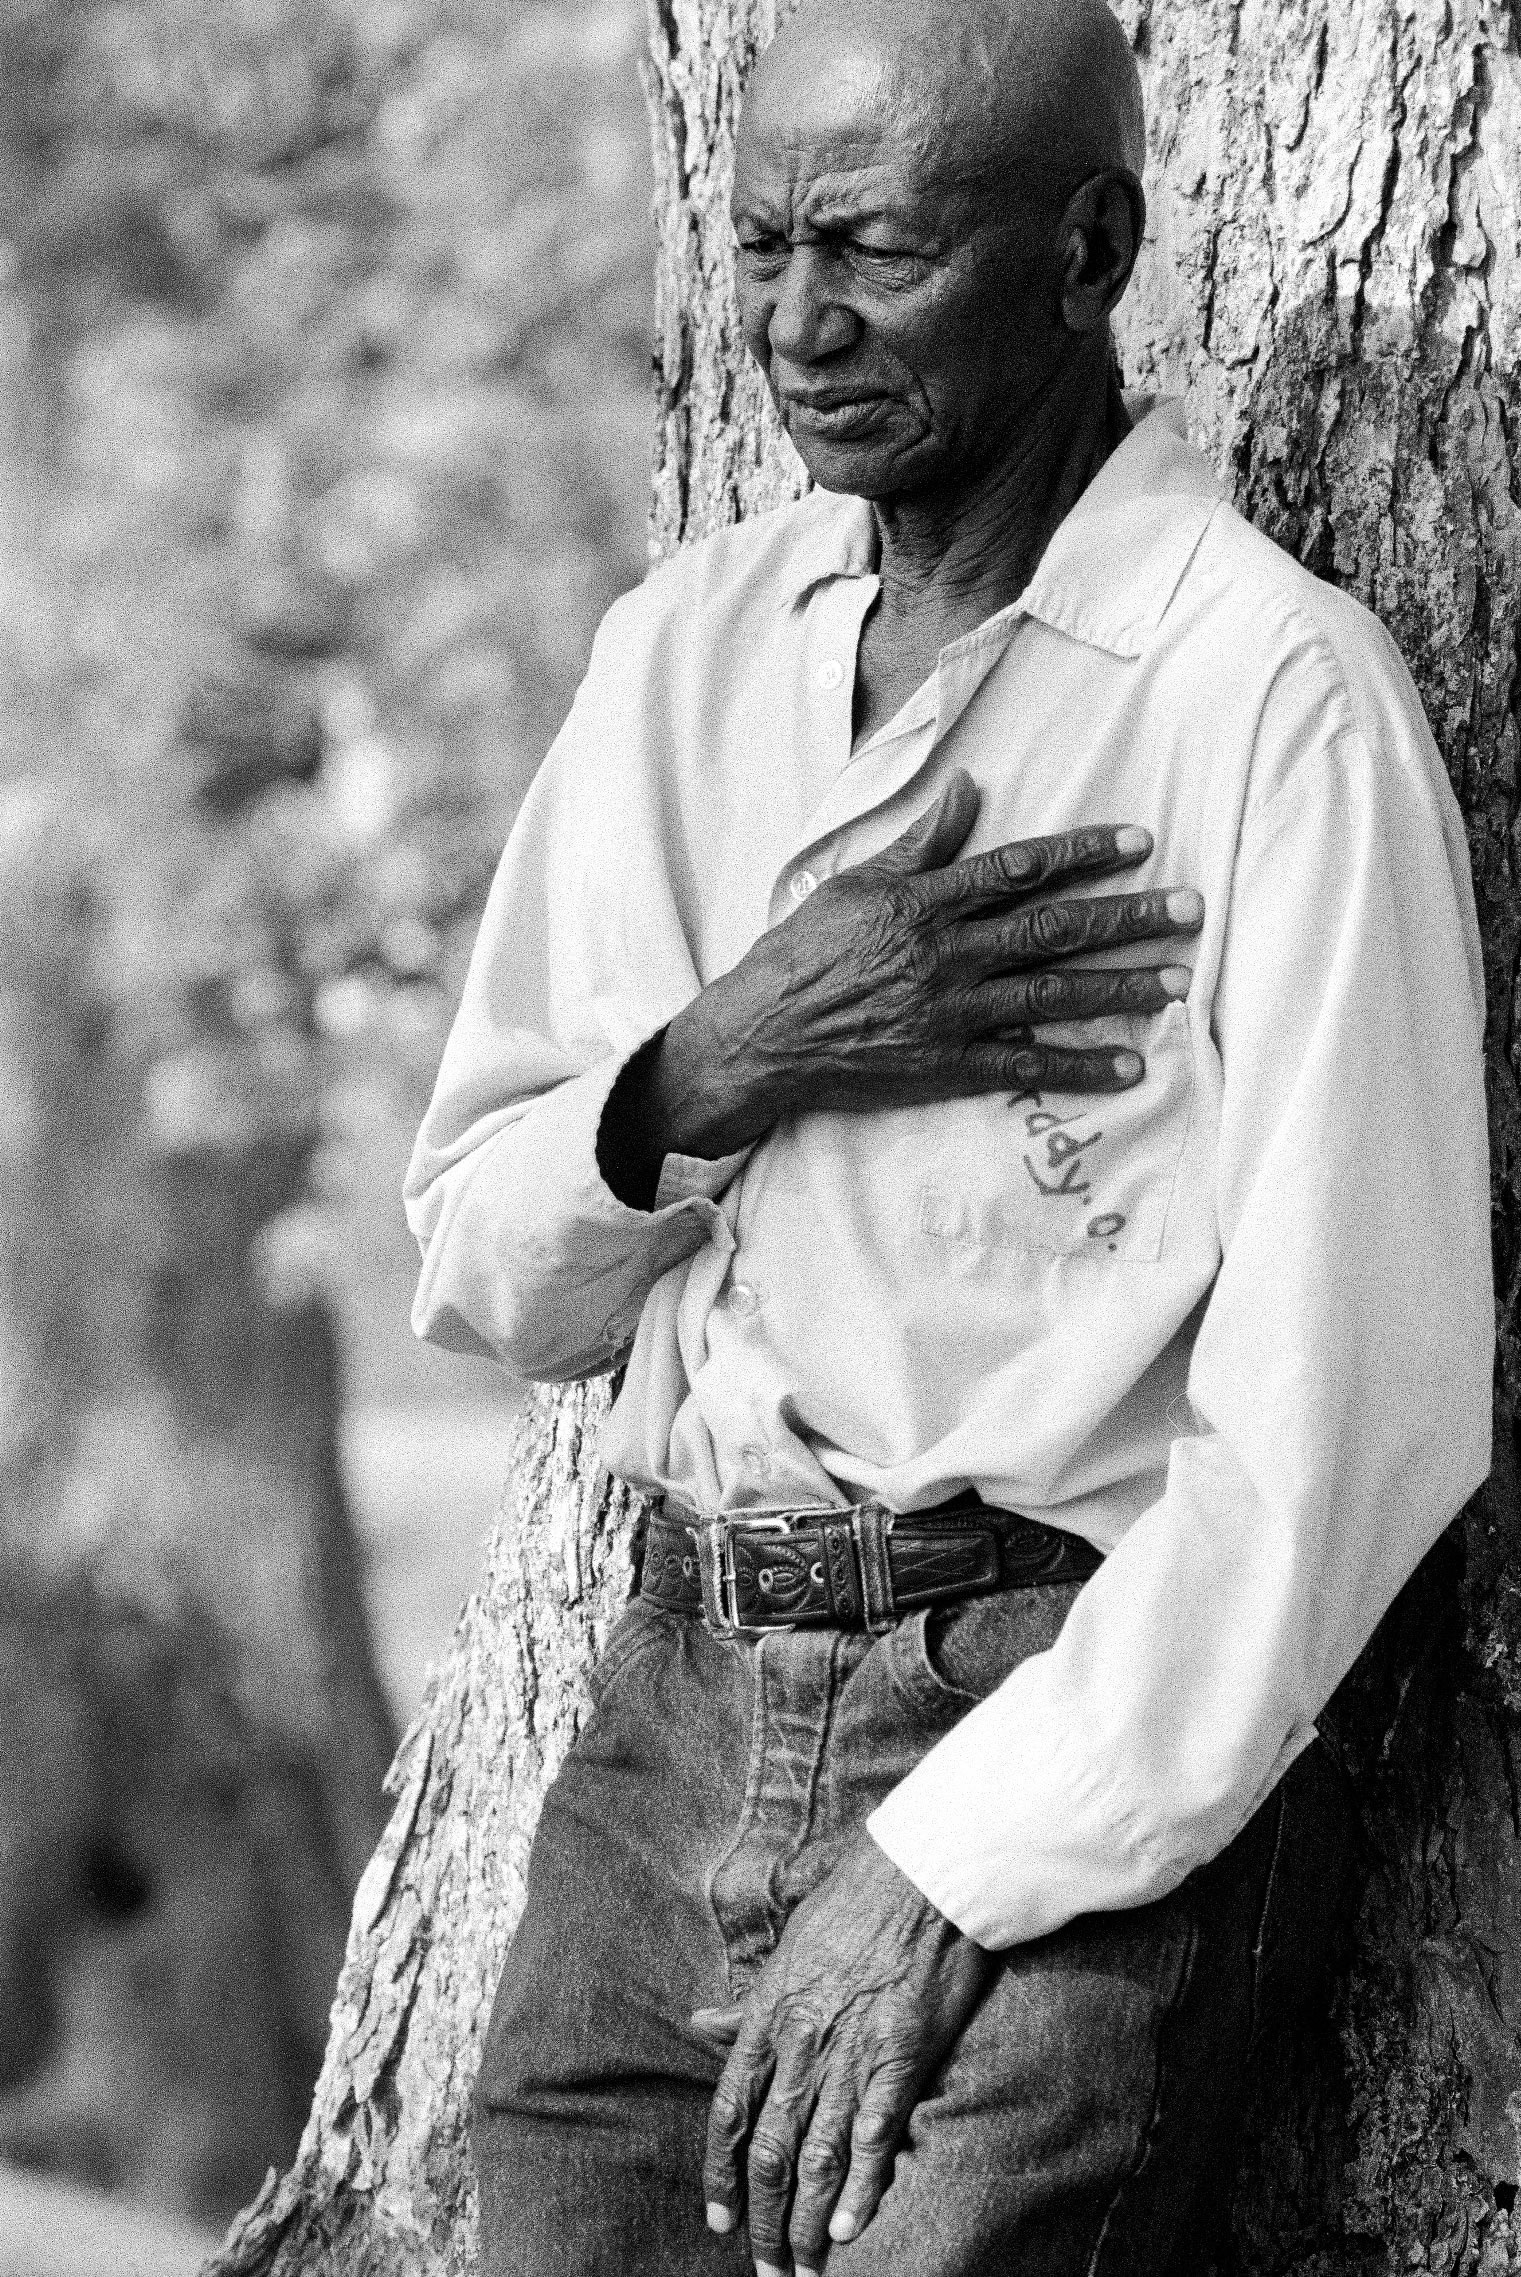 Image: Chandra McCormick. Daddy’O, The Oldest Inmate in Angola State Penitentiary, 2004. Archival pigment print. Courtesy of the artist. © Chandra McCormick